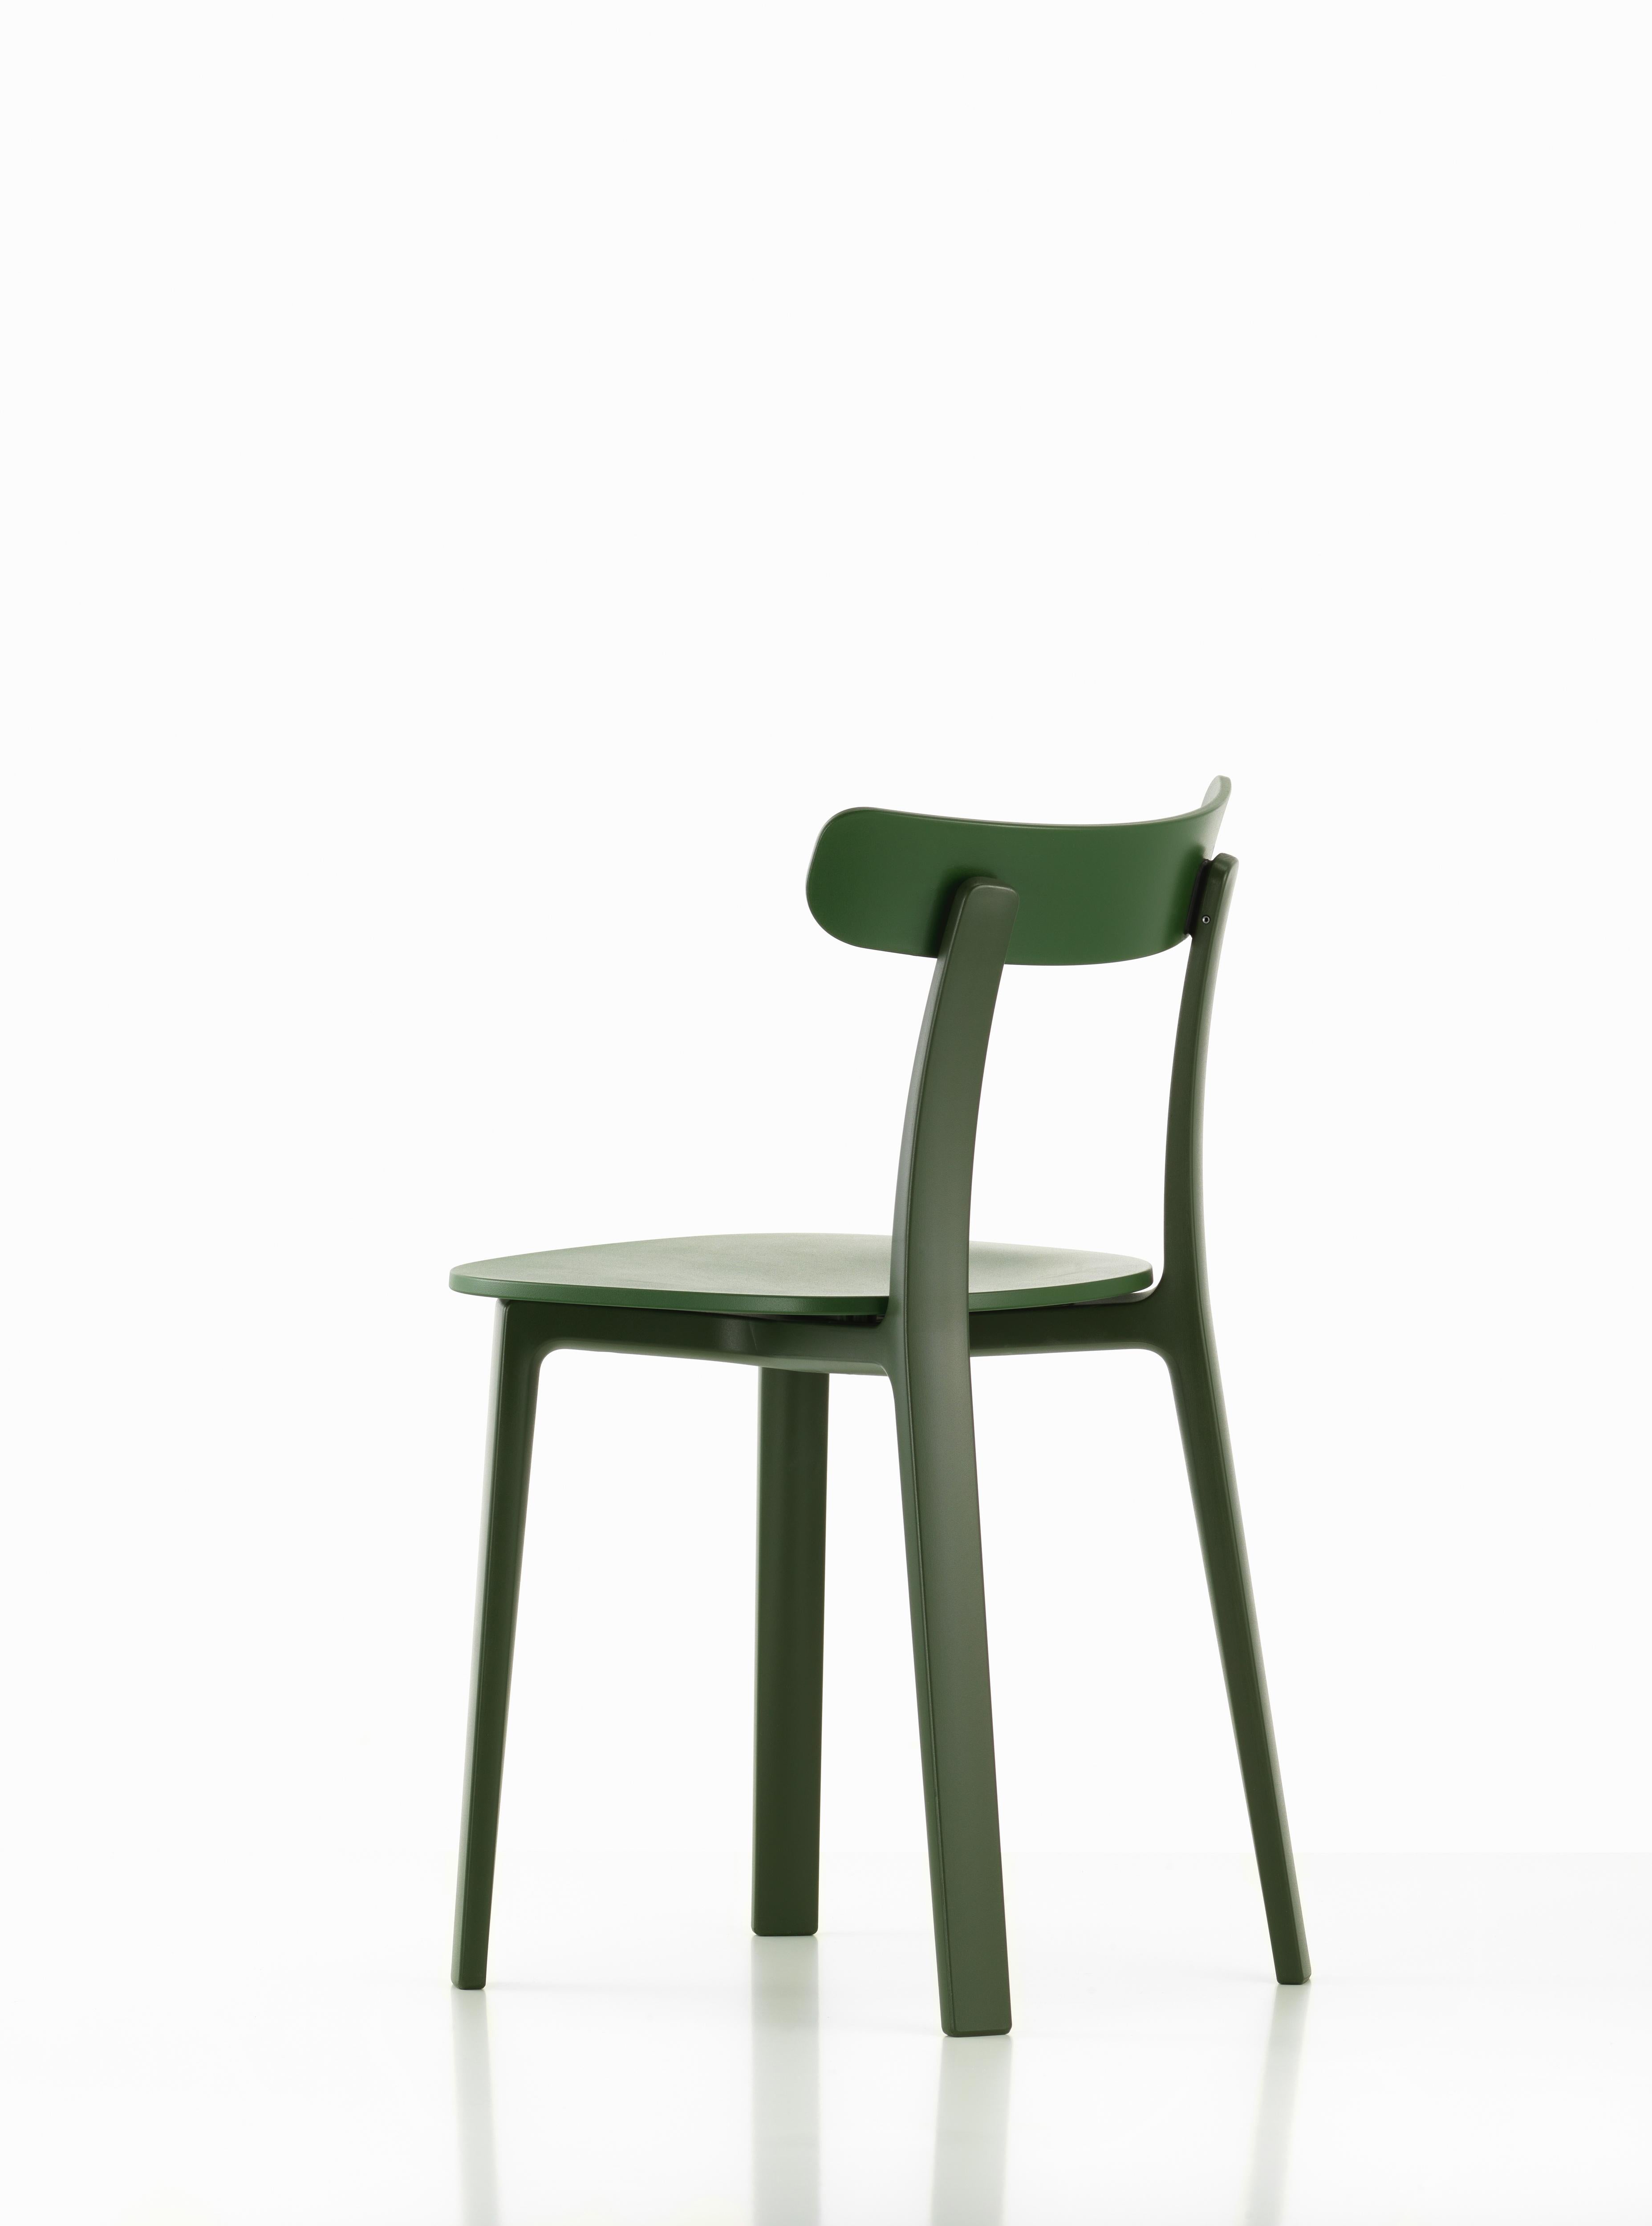 Swiss Vitra All Plastic Chair in Ivy Two-Tone by Jasper Morrison